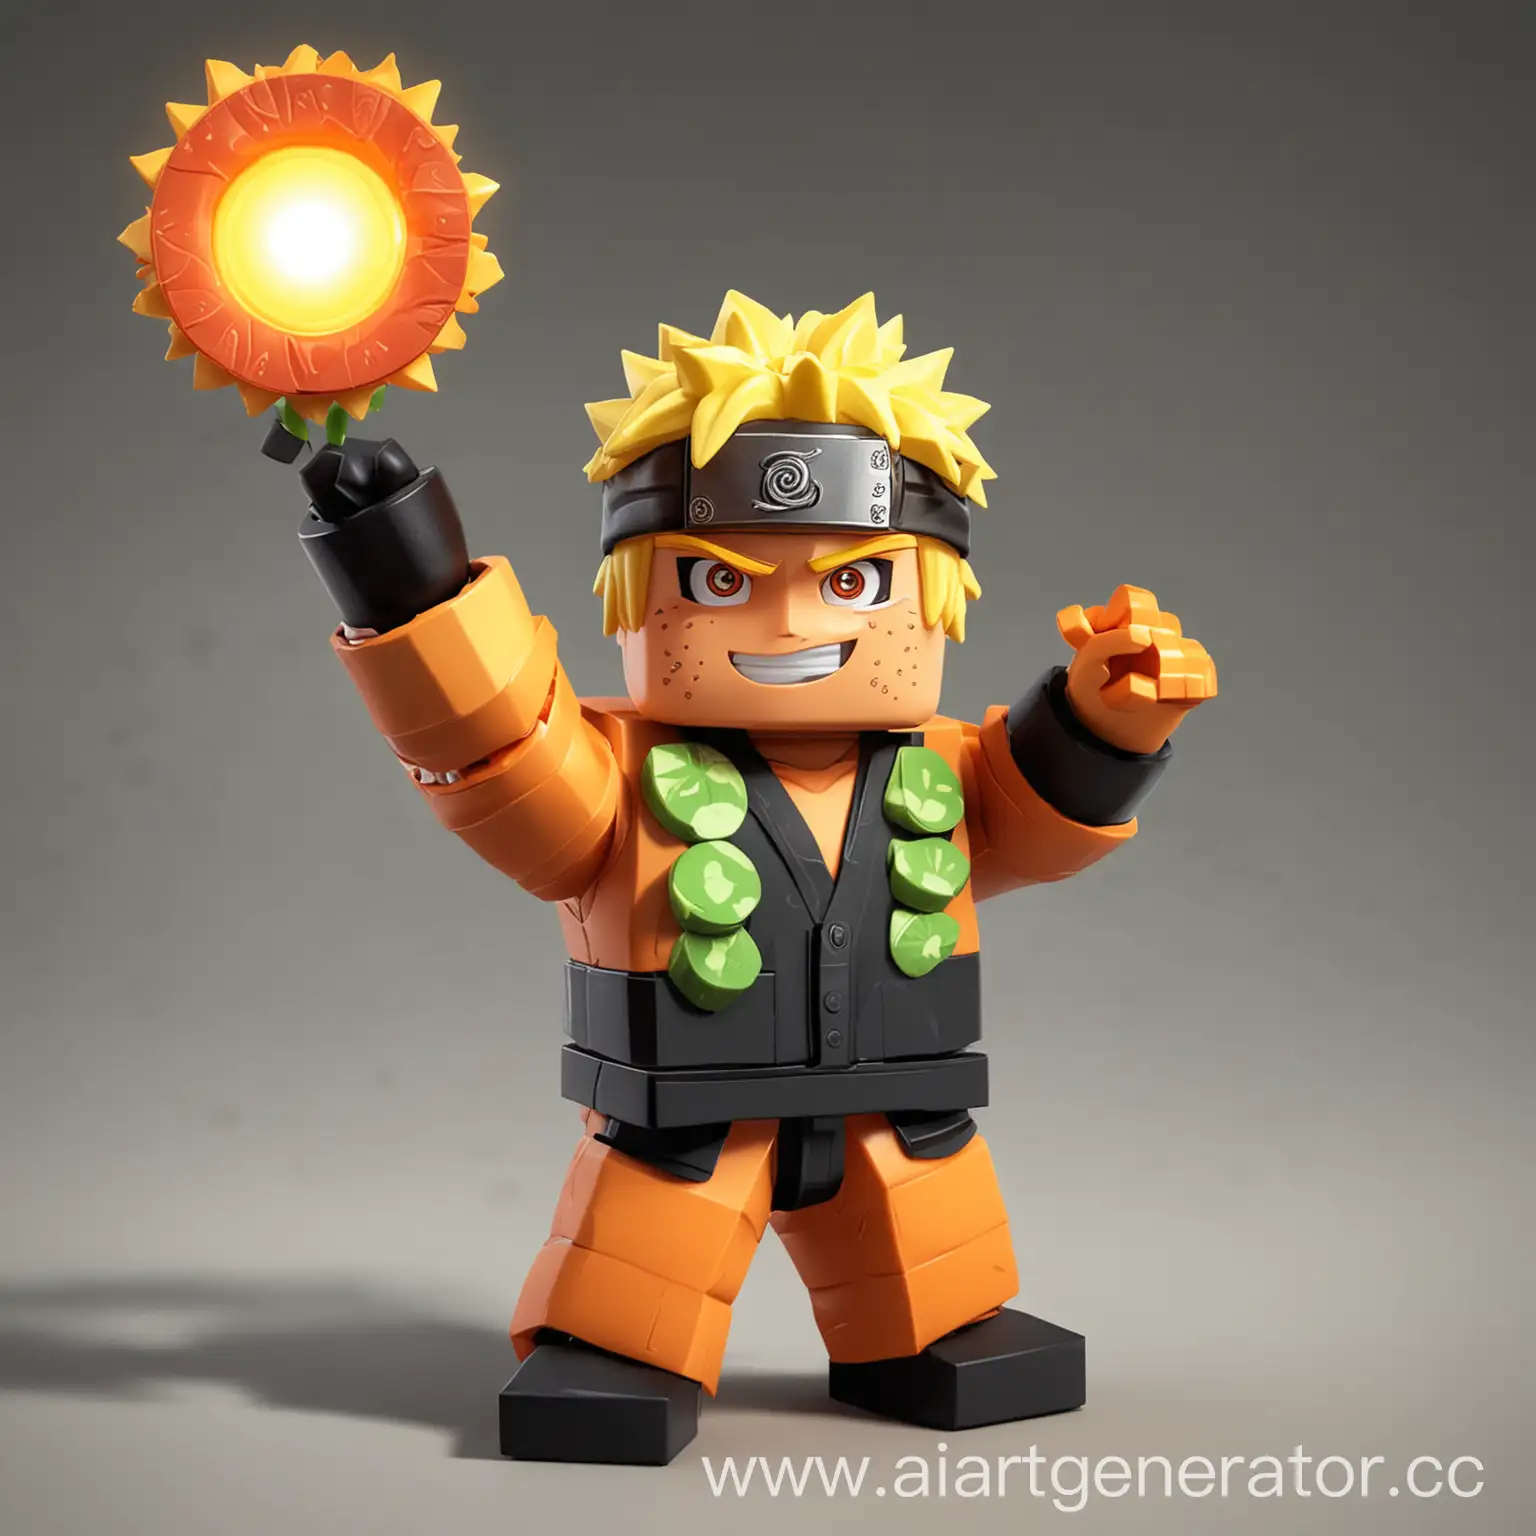 Naruto-Character-Holding-Fruit-of-the-Sun-in-Roblox-Blockfruit-Mode